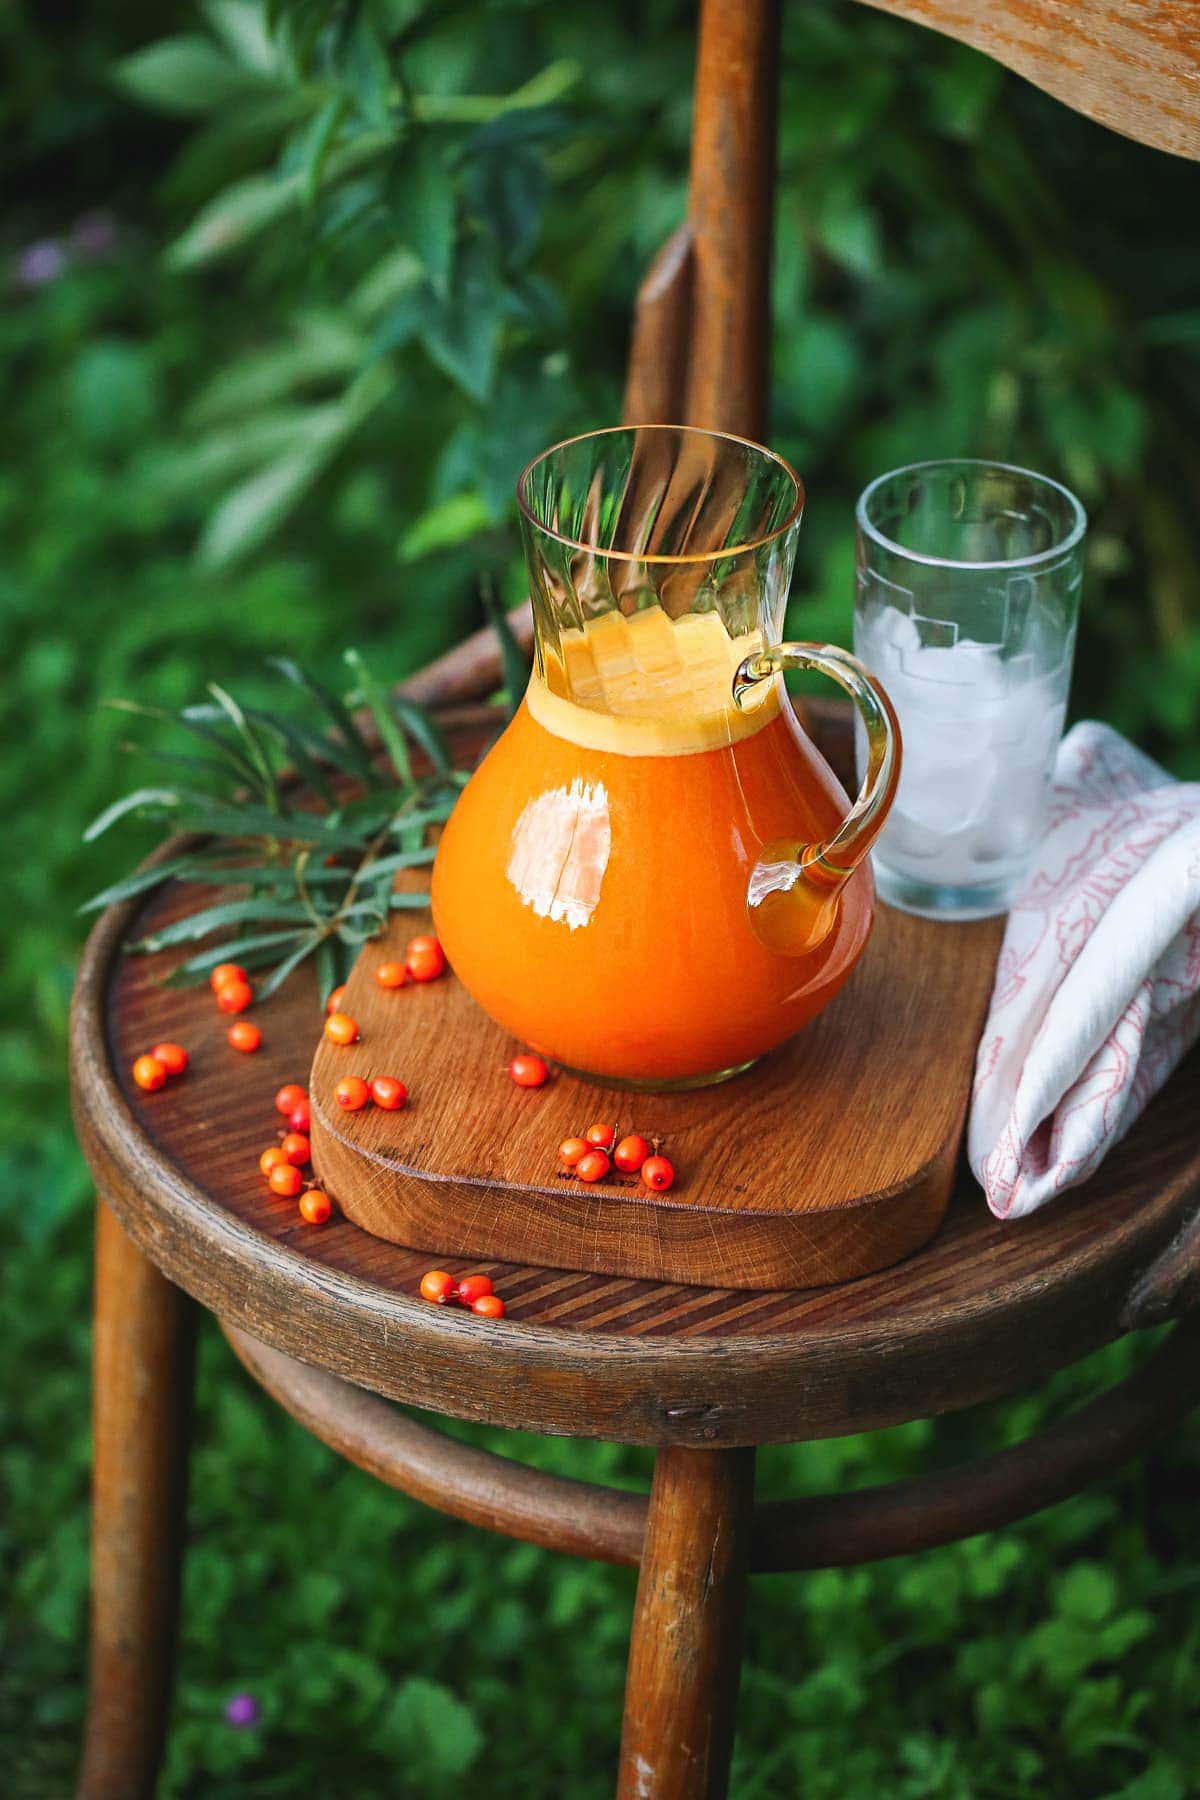 Sea Buckthorn Juice in a glass jug placed on a wooden board